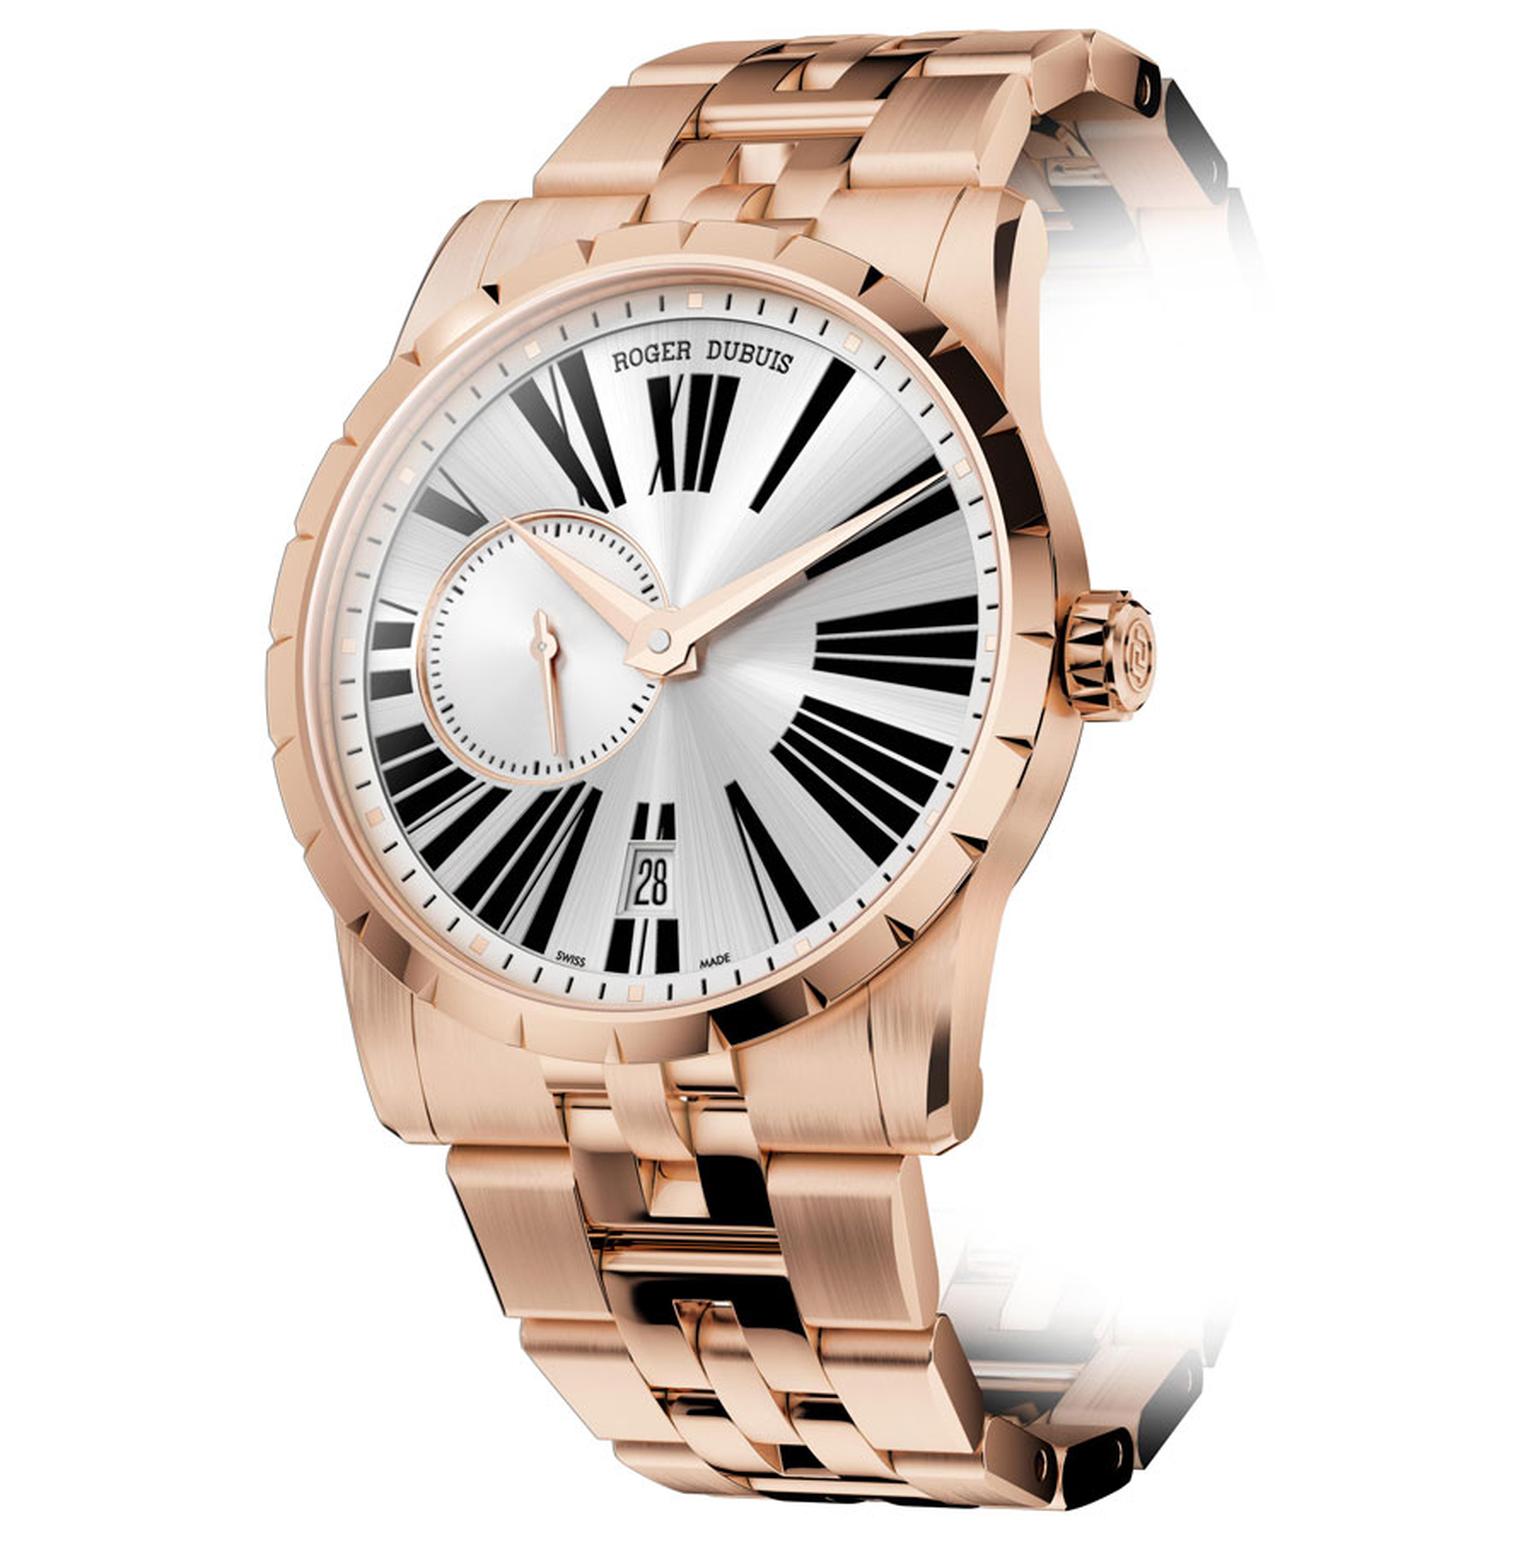 Roger-Dubuis-Excalibur-42-in-pink-gold.jpg